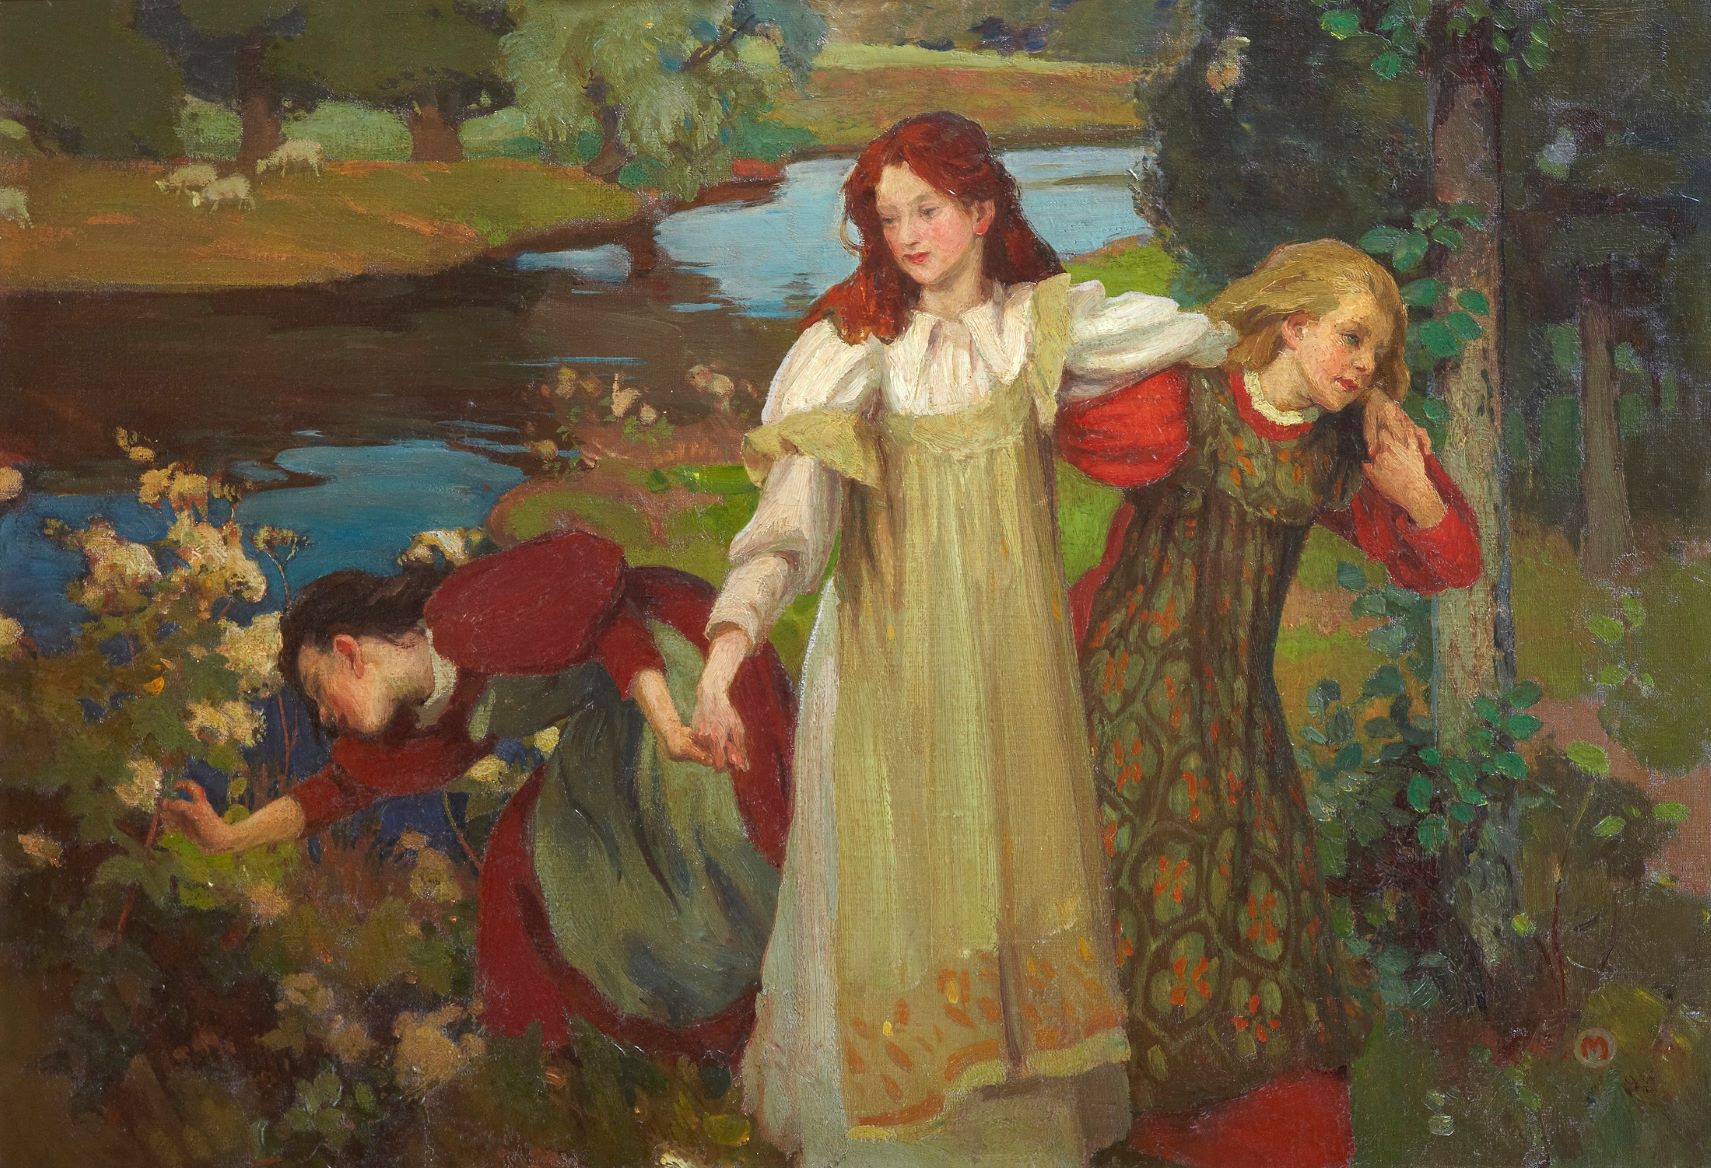 Charles H. Mackie There were Three Maidens pud a Flower (By the Bonnie Banks o Fordie) c.1897